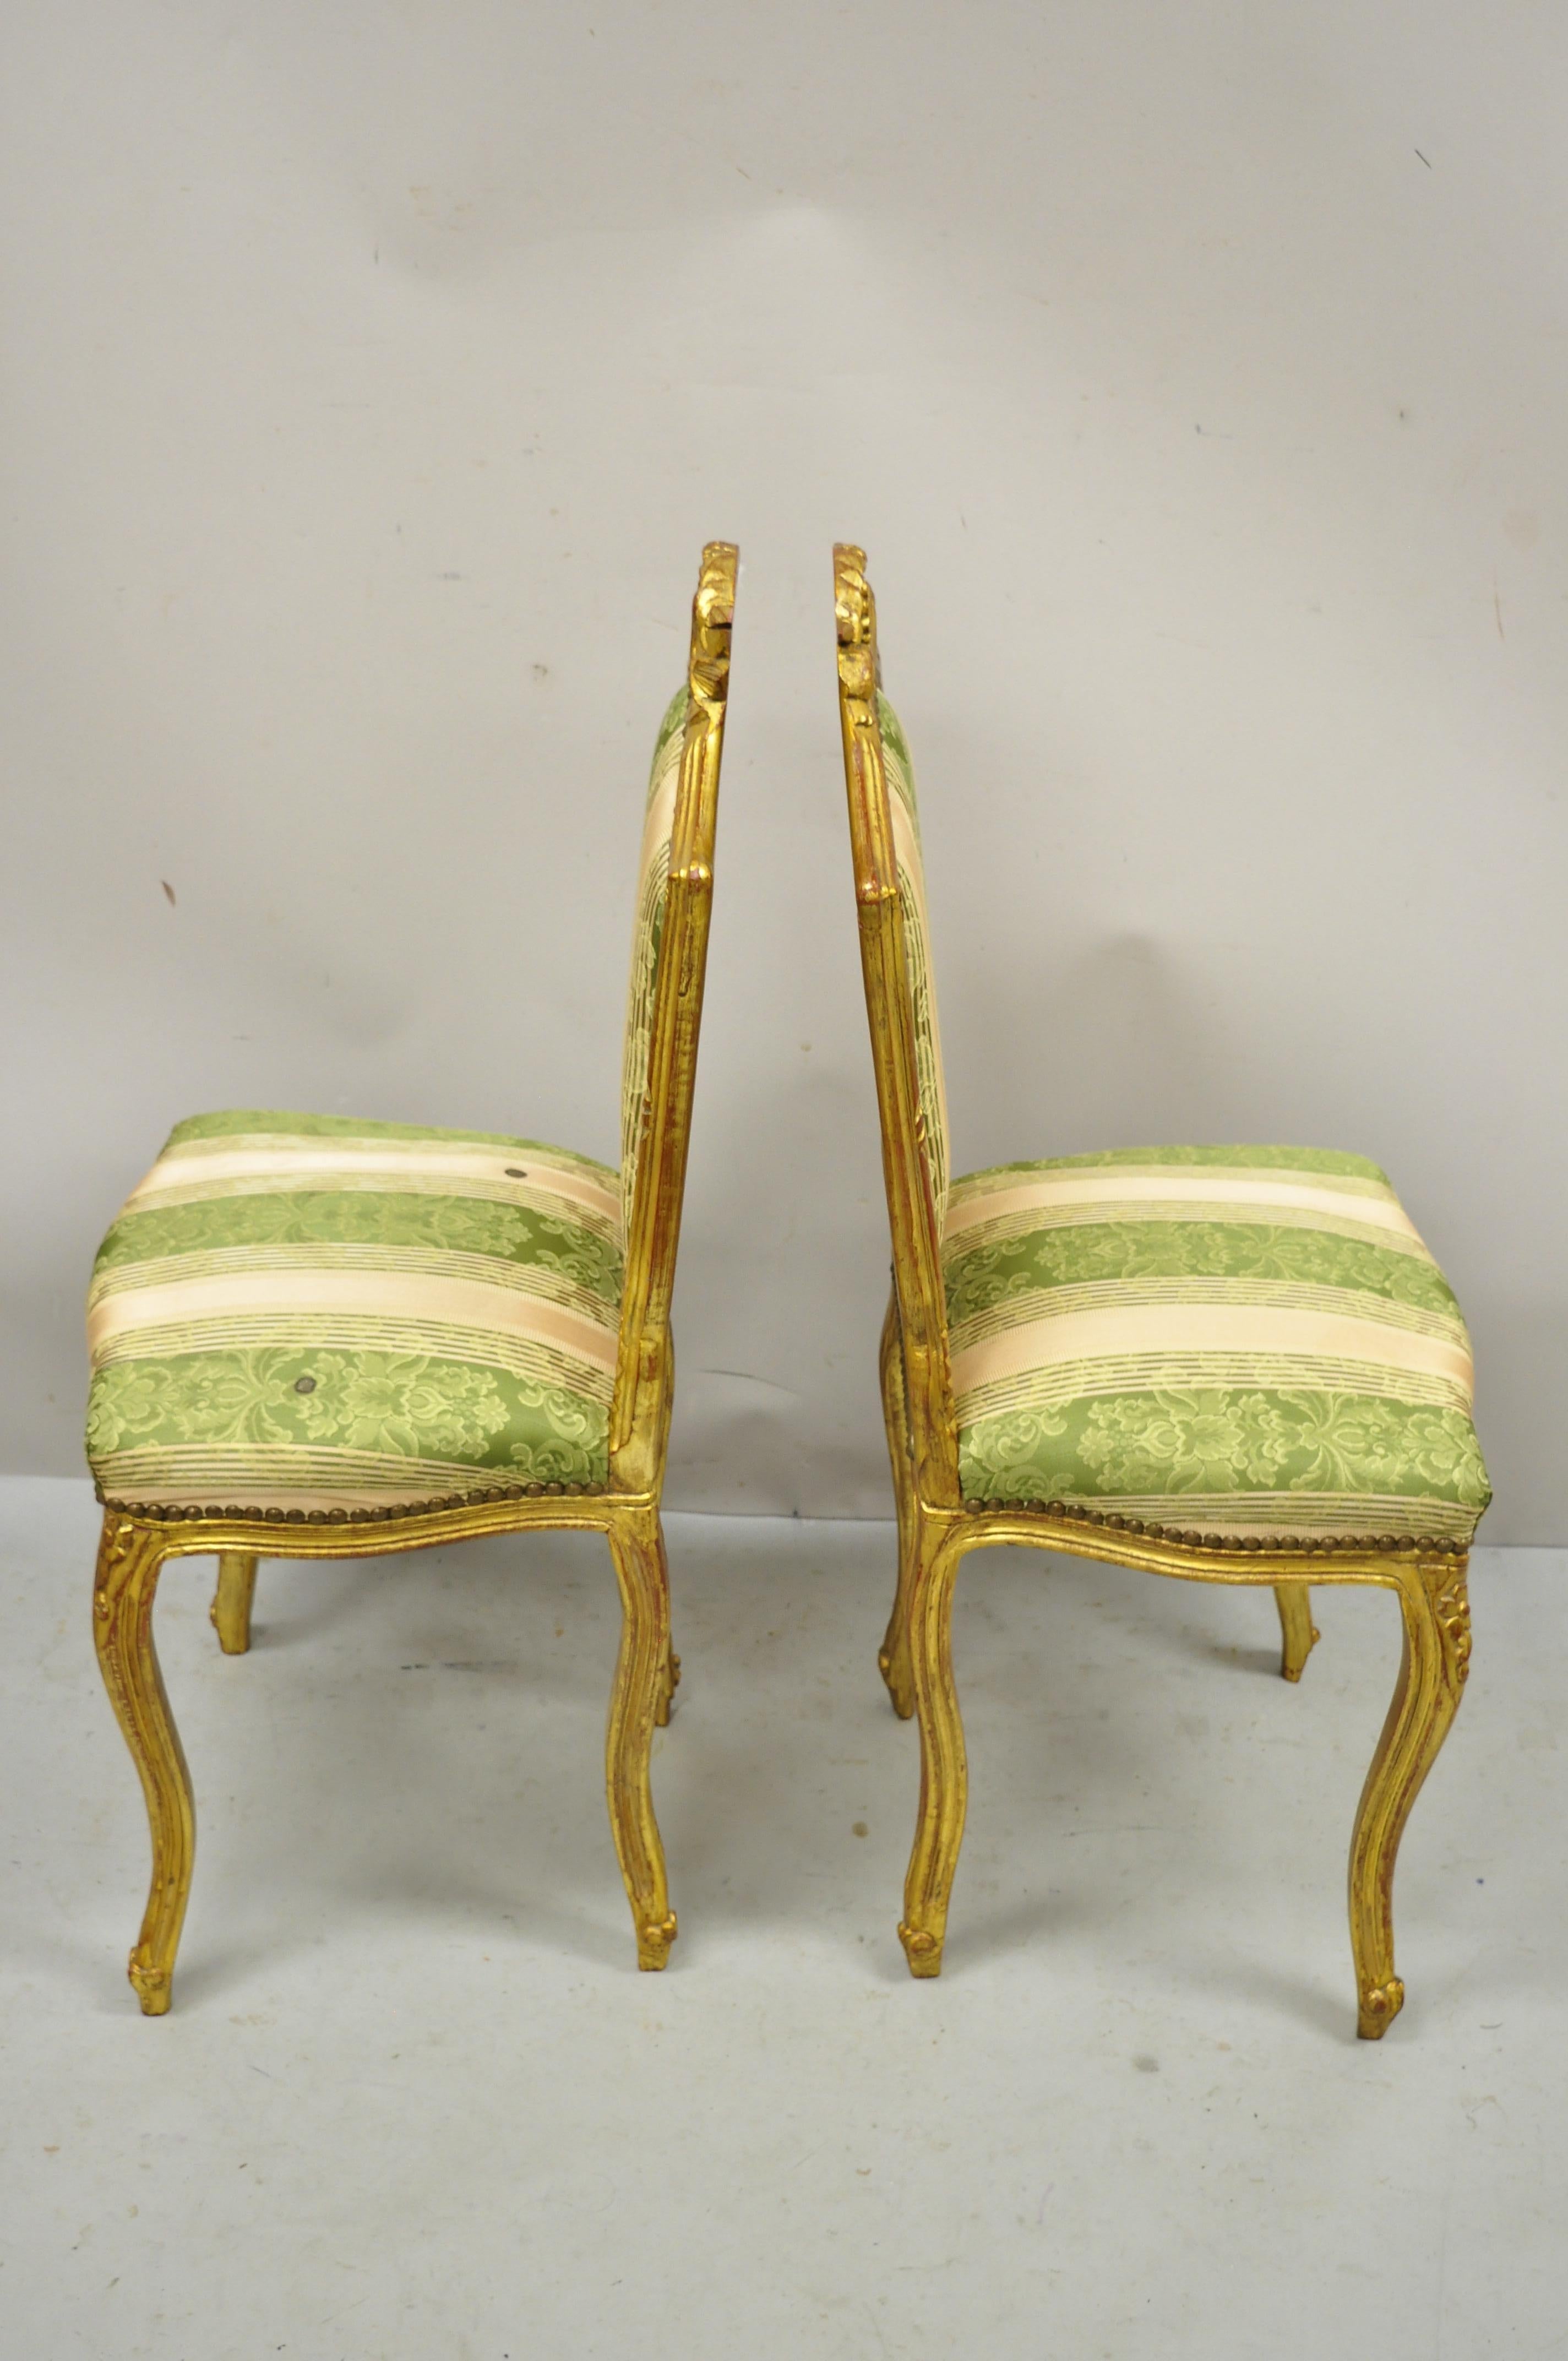 Vintage French Louis XV Style Gold Giltwood Carved Boudoir Side Chairs, a Pair For Sale 5